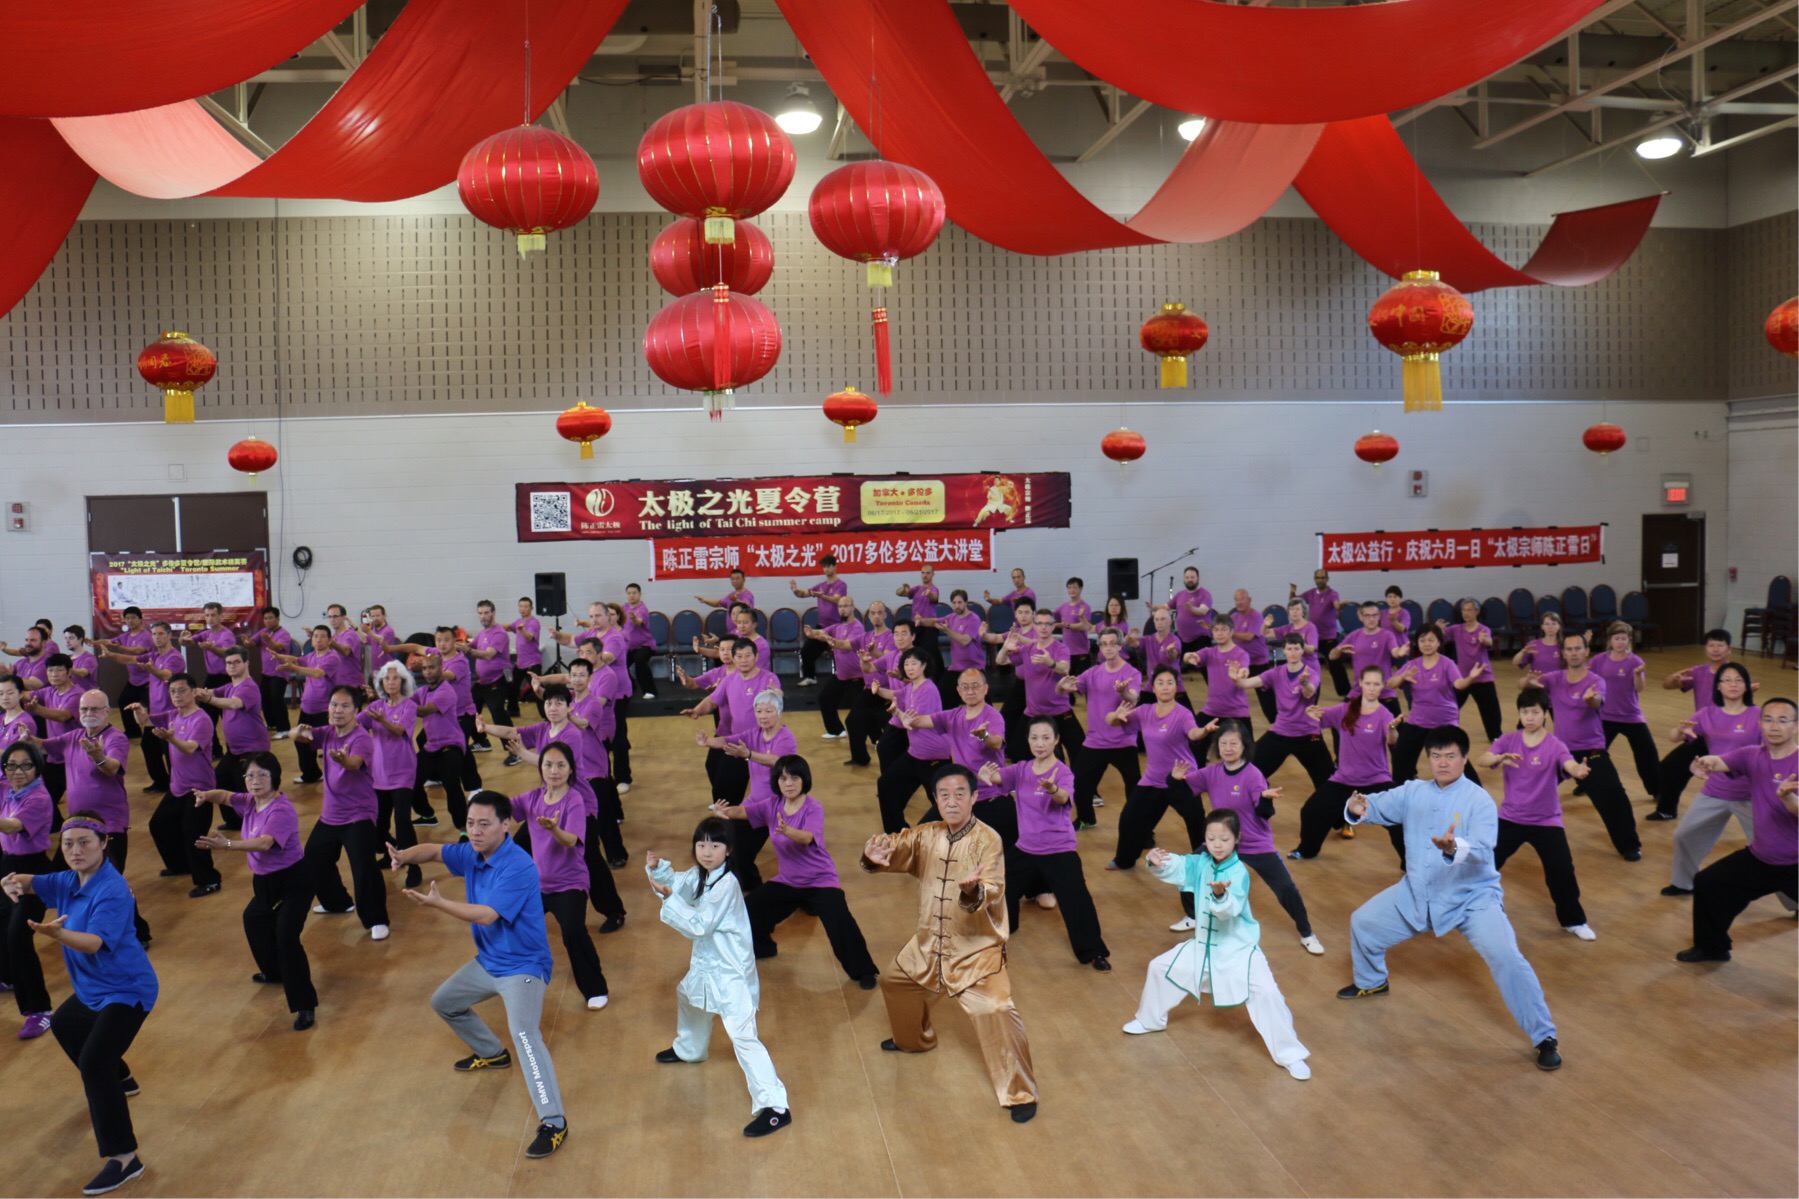 190210) -- SAN FRANCISCO, Feb. 10, 2019 (Xinhua) -- Chinese Tai Chi  grandmaster Chen Zhenglei and his daughter Chen Juan perform Tai Chi during  a Spring Festival tour by Chinese arts troupes